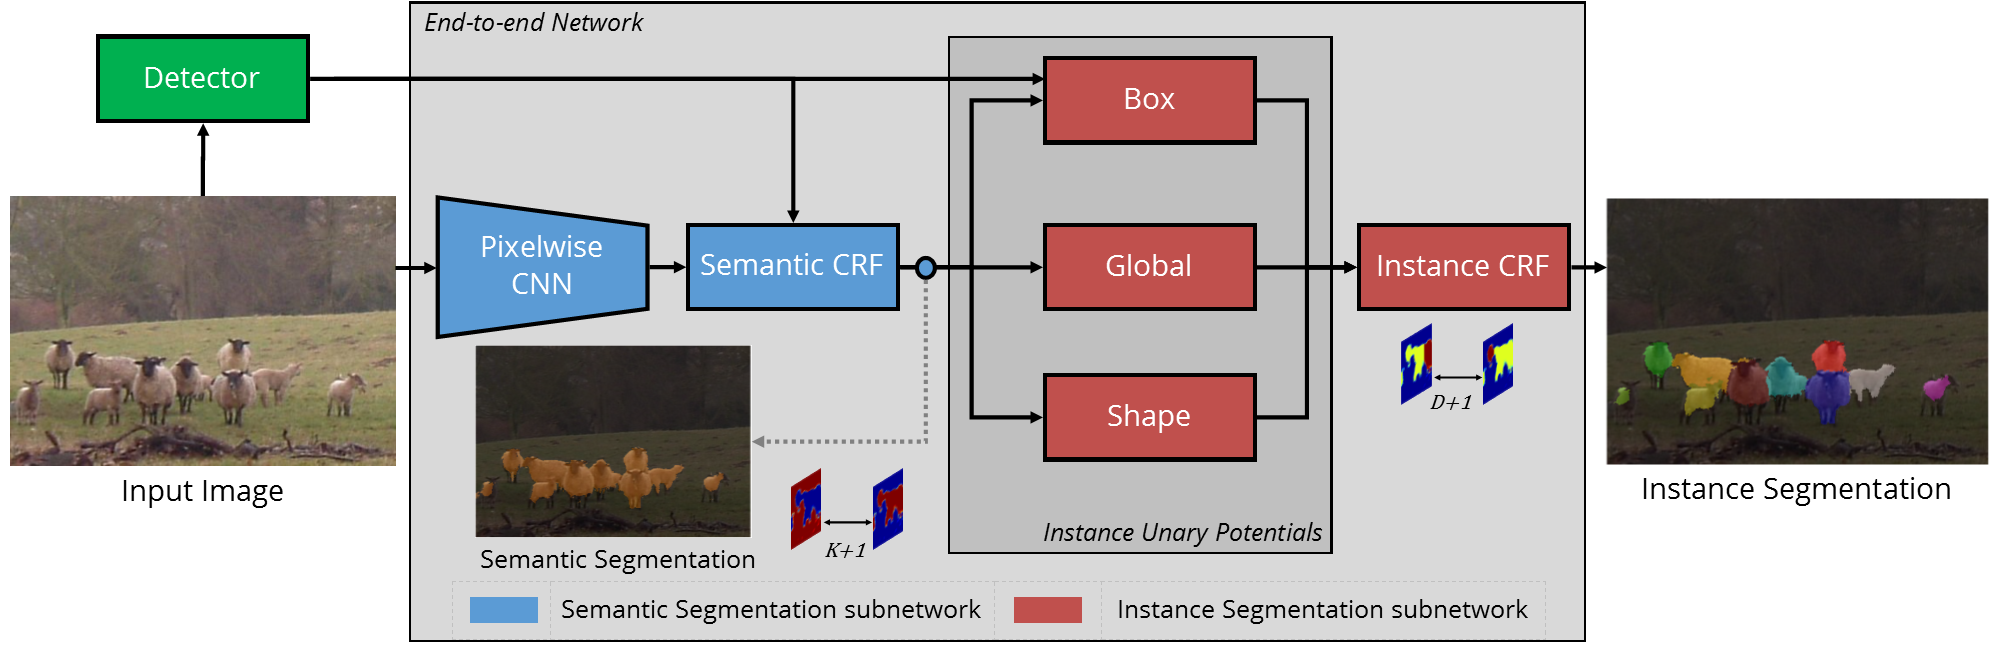 Semantic Segmentation with end-to-end trainable Higher Order Conditional Random Fields